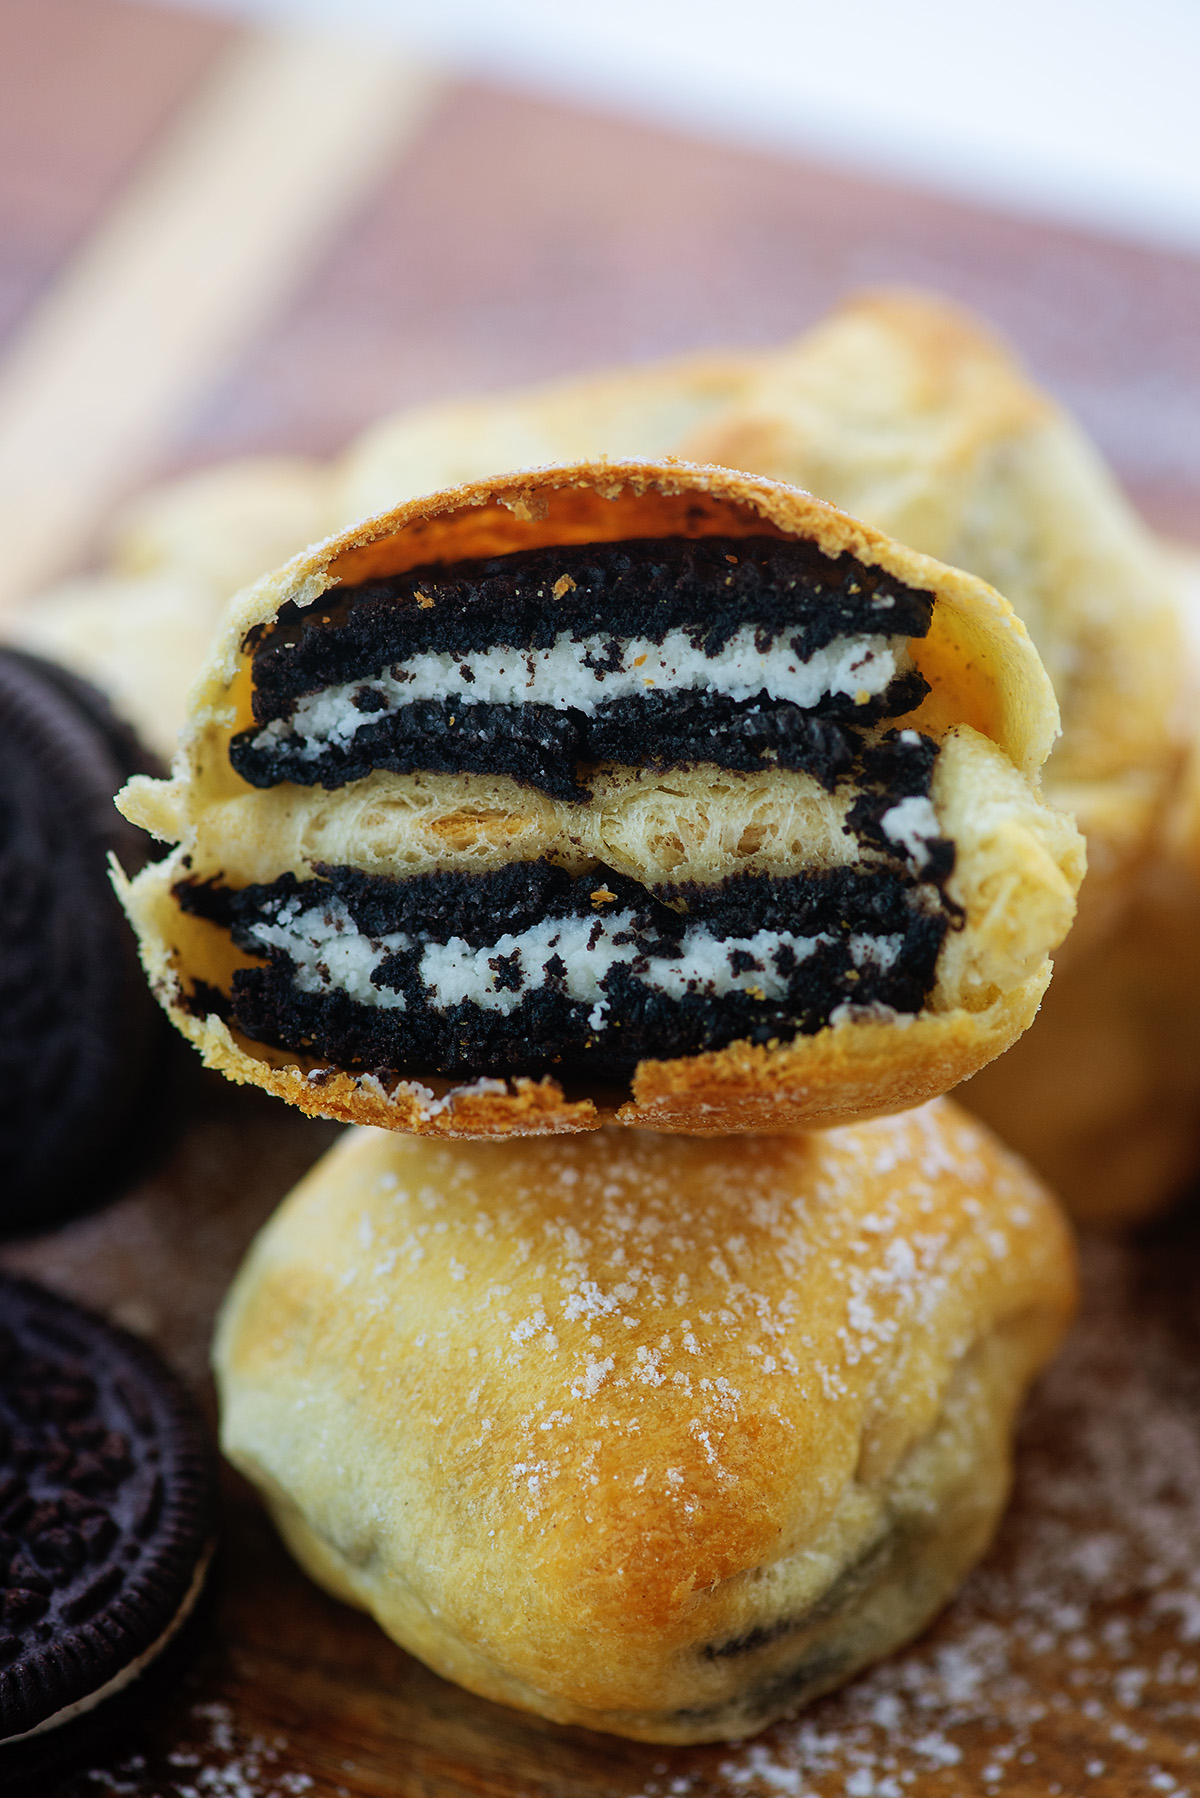 A fried oreo split in half and folded on top of whole fried oreo.